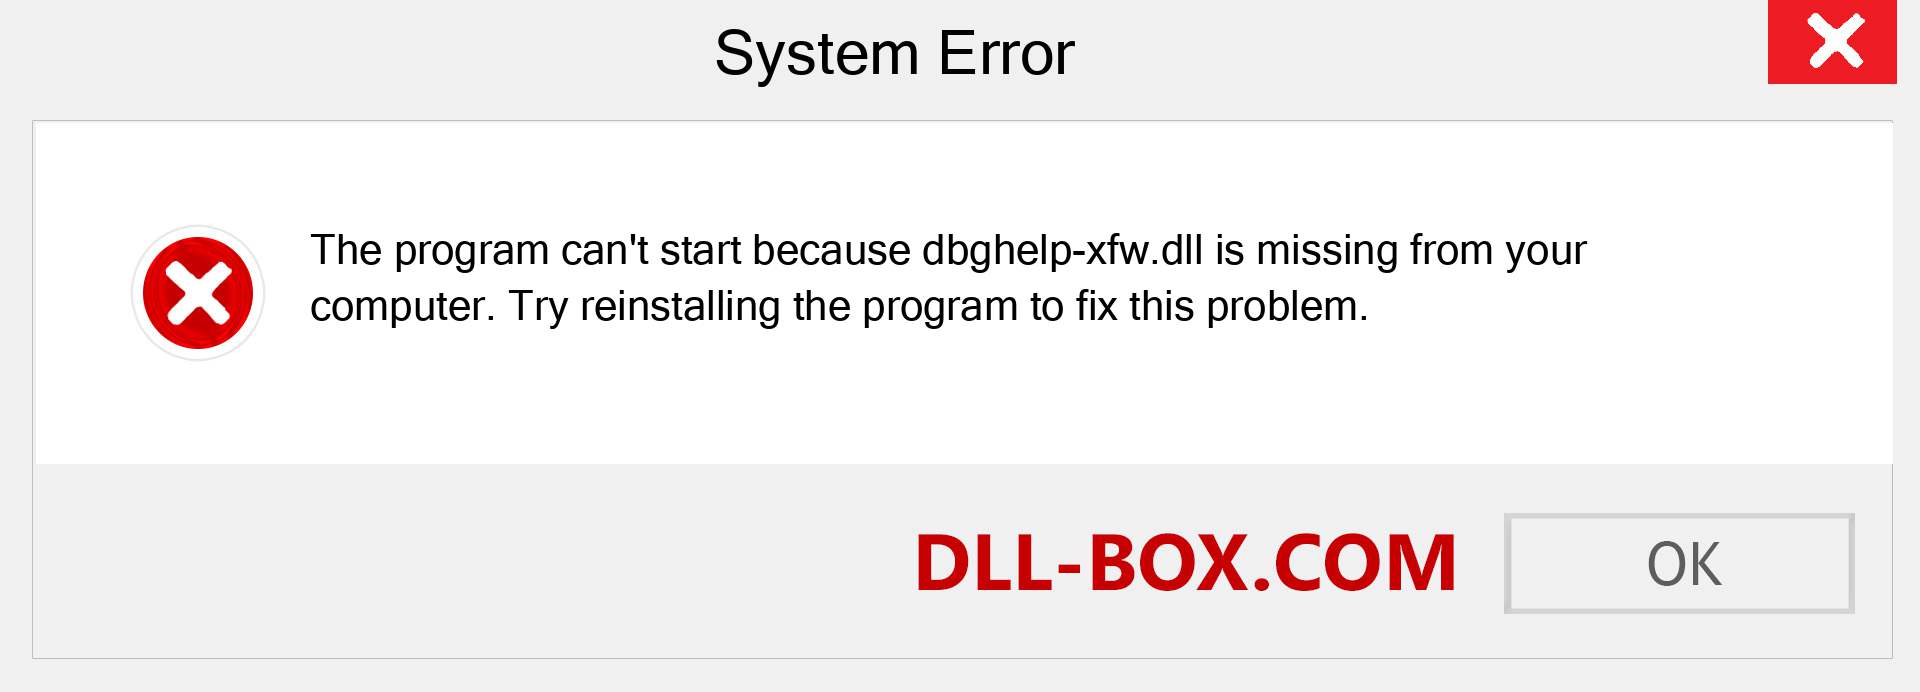  dbghelp-xfw.dll file is missing?. Download for Windows 7, 8, 10 - Fix  dbghelp-xfw dll Missing Error on Windows, photos, images